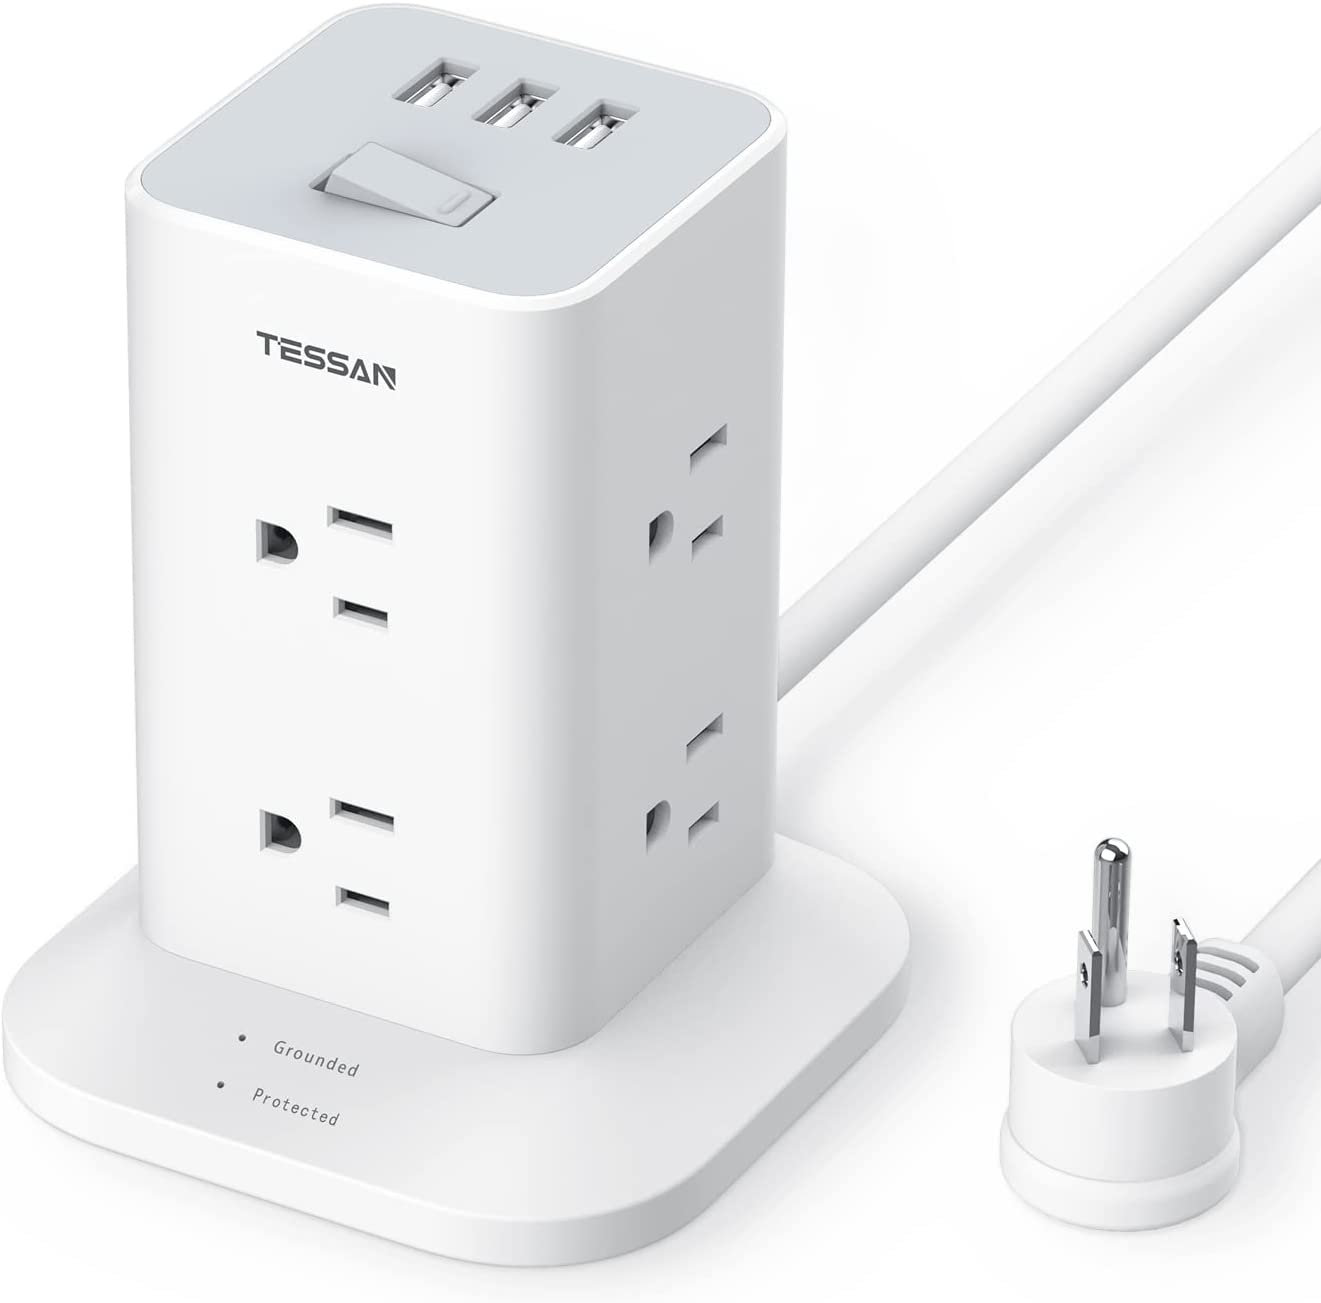 Replace Power Strips with a Tower Surge Protector to Clean Up 